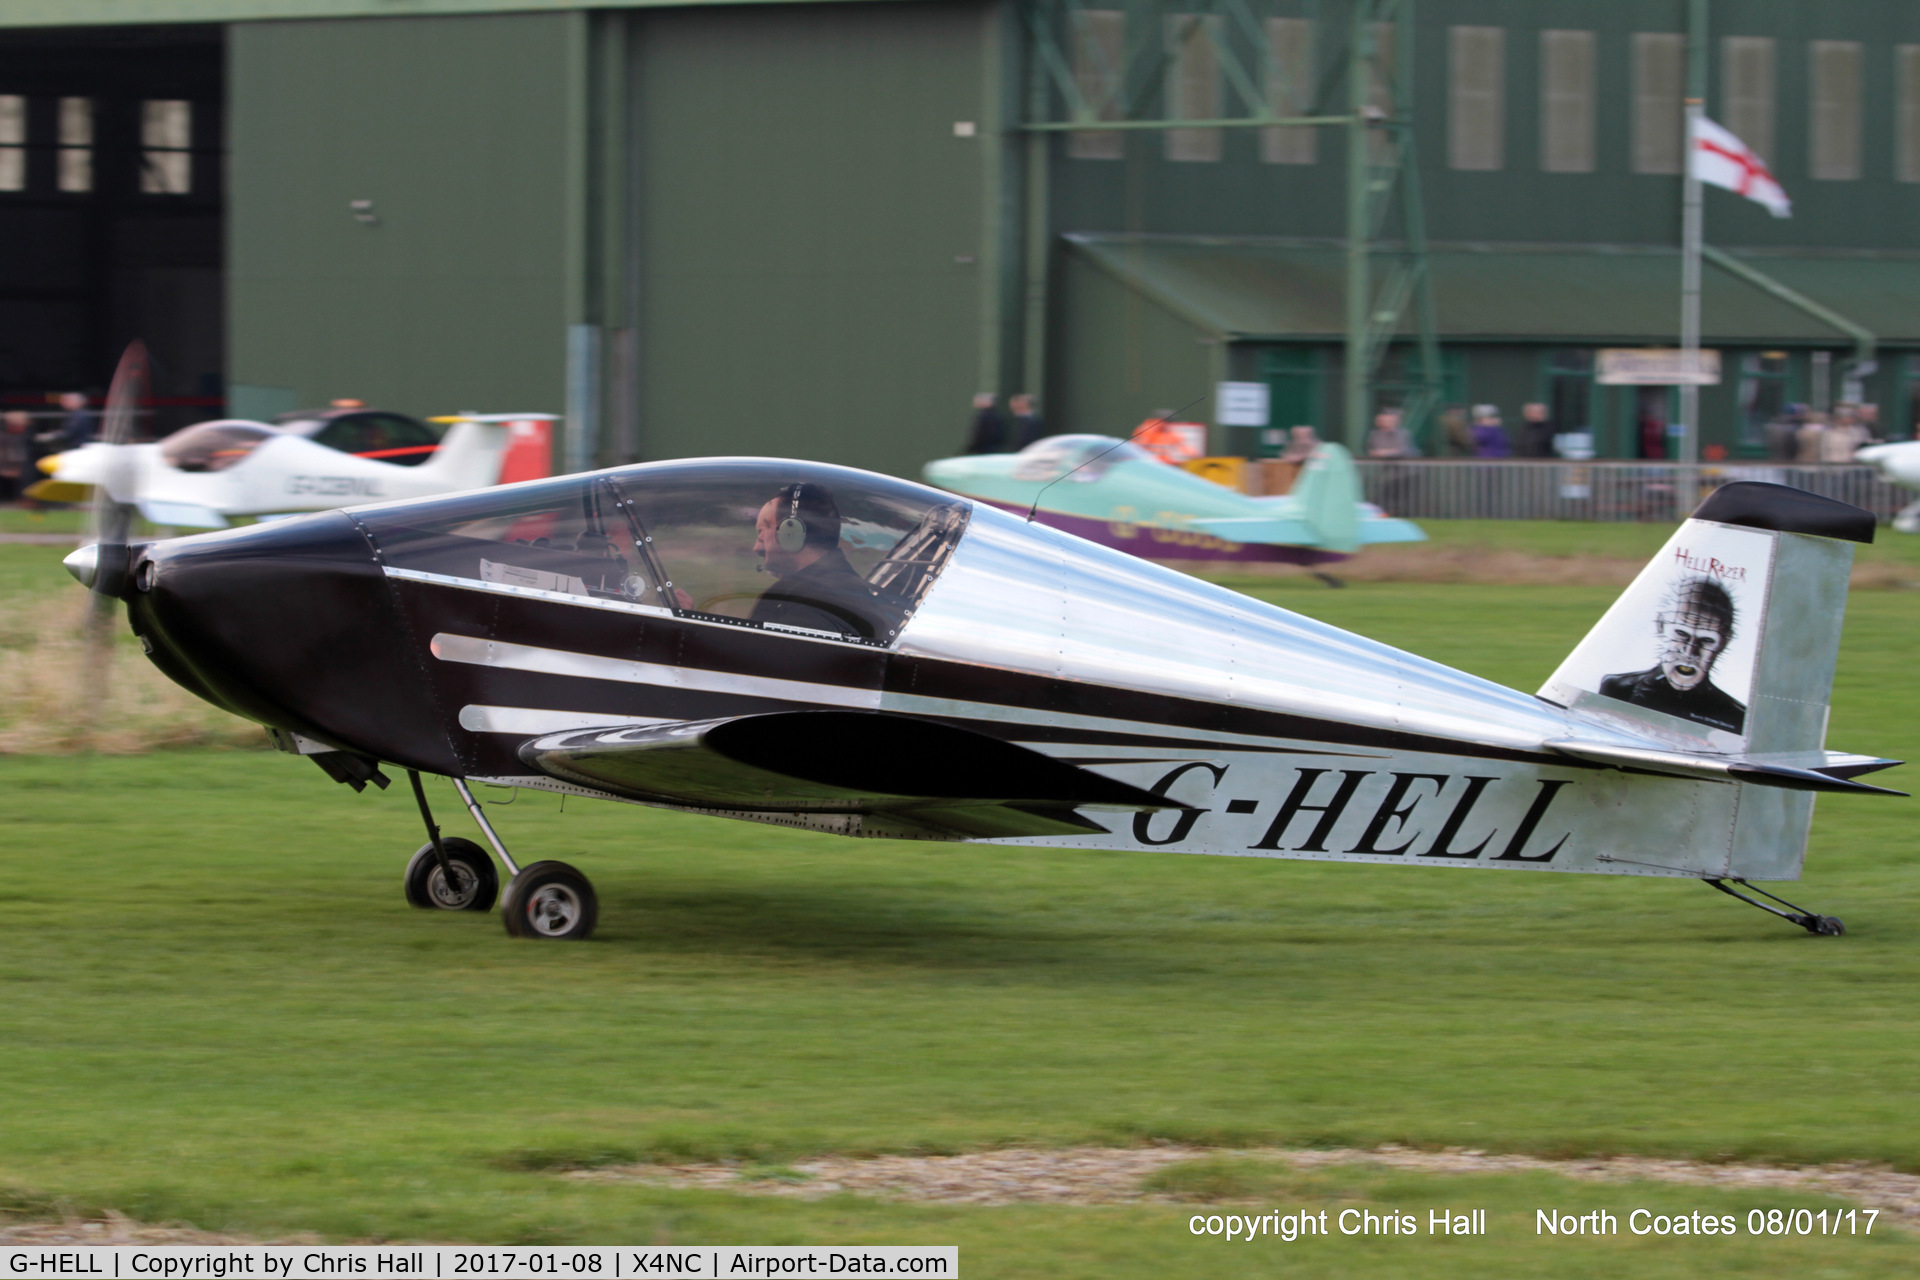 G-HELL, 2015 Sonex 3300 C/N LAA 337-15182, at the Brass Monkey fly in, North Coates